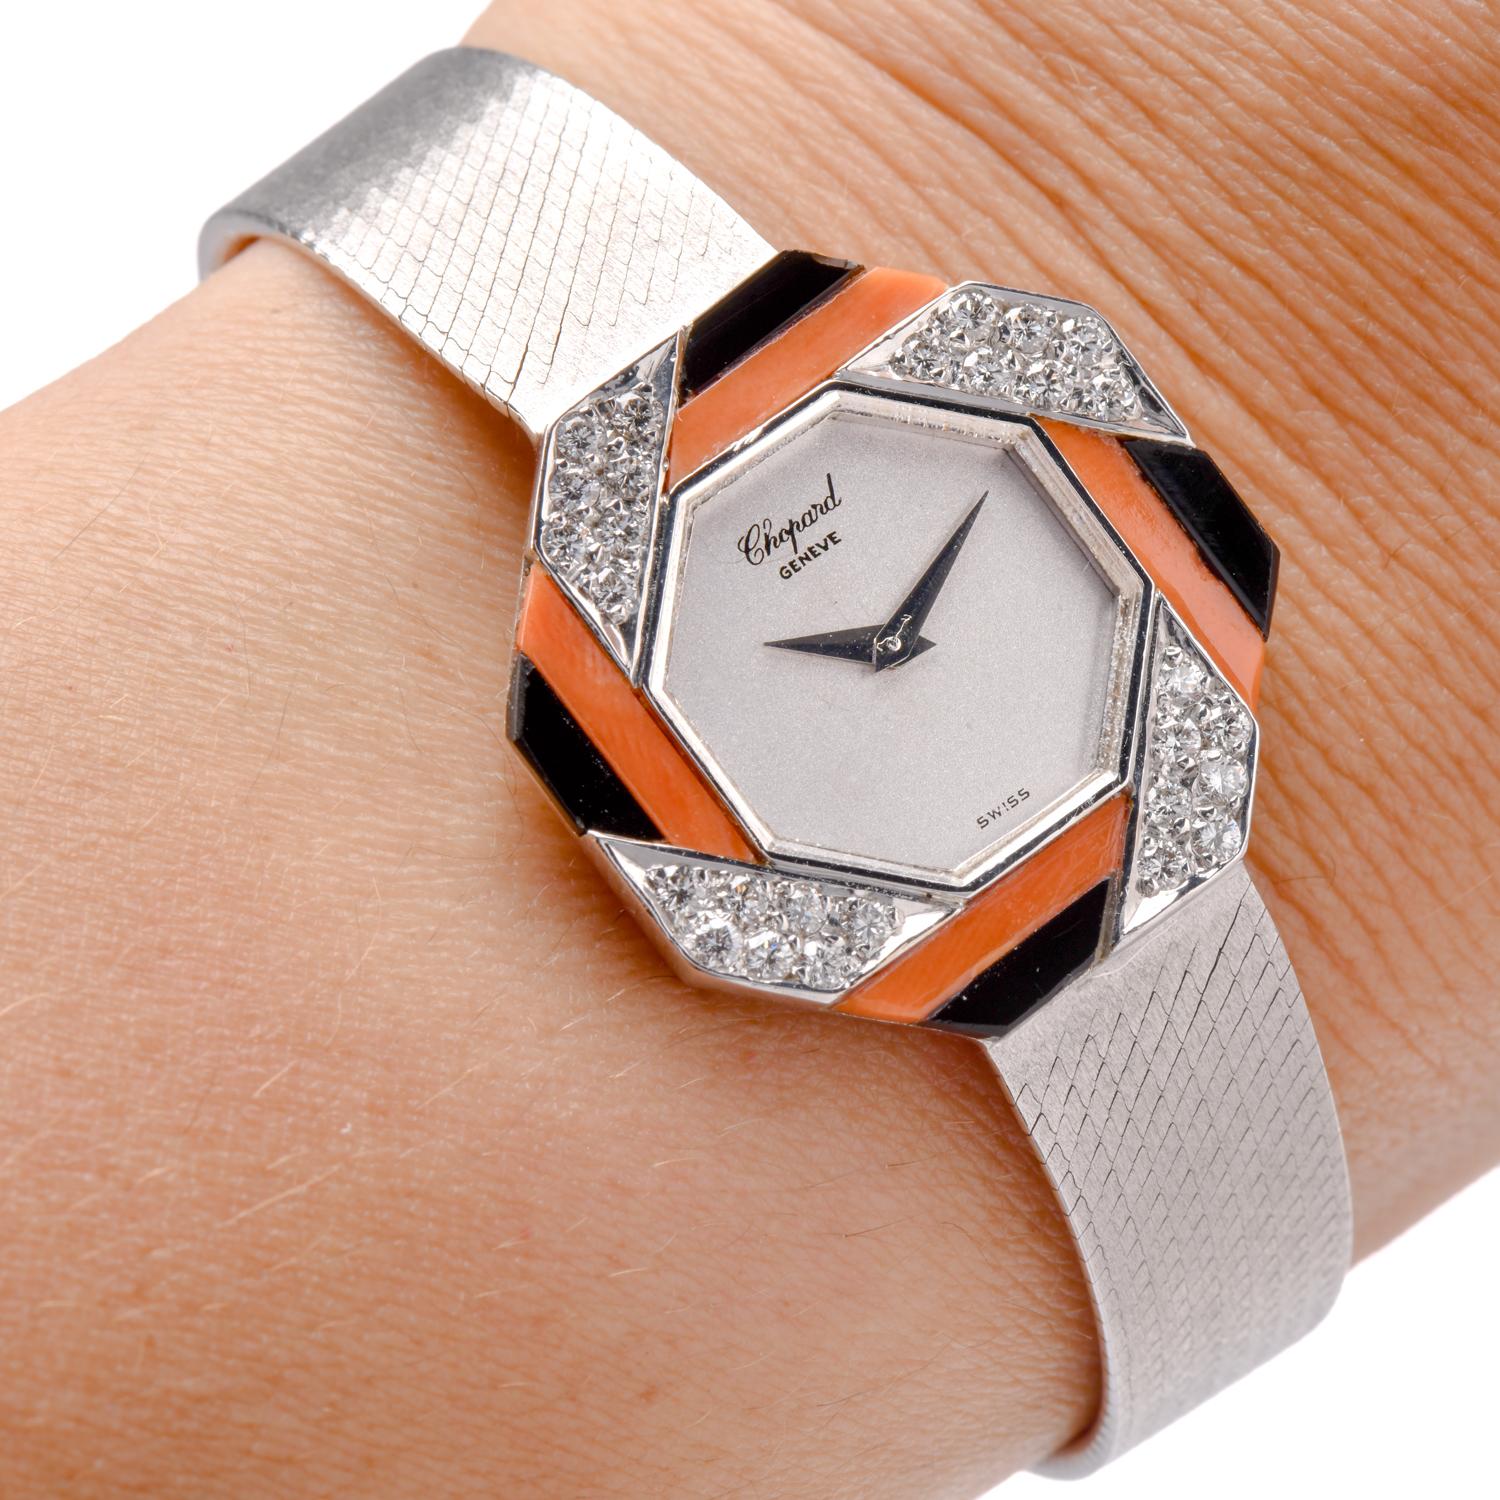 This Elegant Vintage 1960s Chopard gold ladies' watch is crafted in 18k White gold. It Features a hexagon-shaped case set with diamond, coral, and onyx. Silver color dial with silver color sword hands. Chopard Mechanical movement and White gold